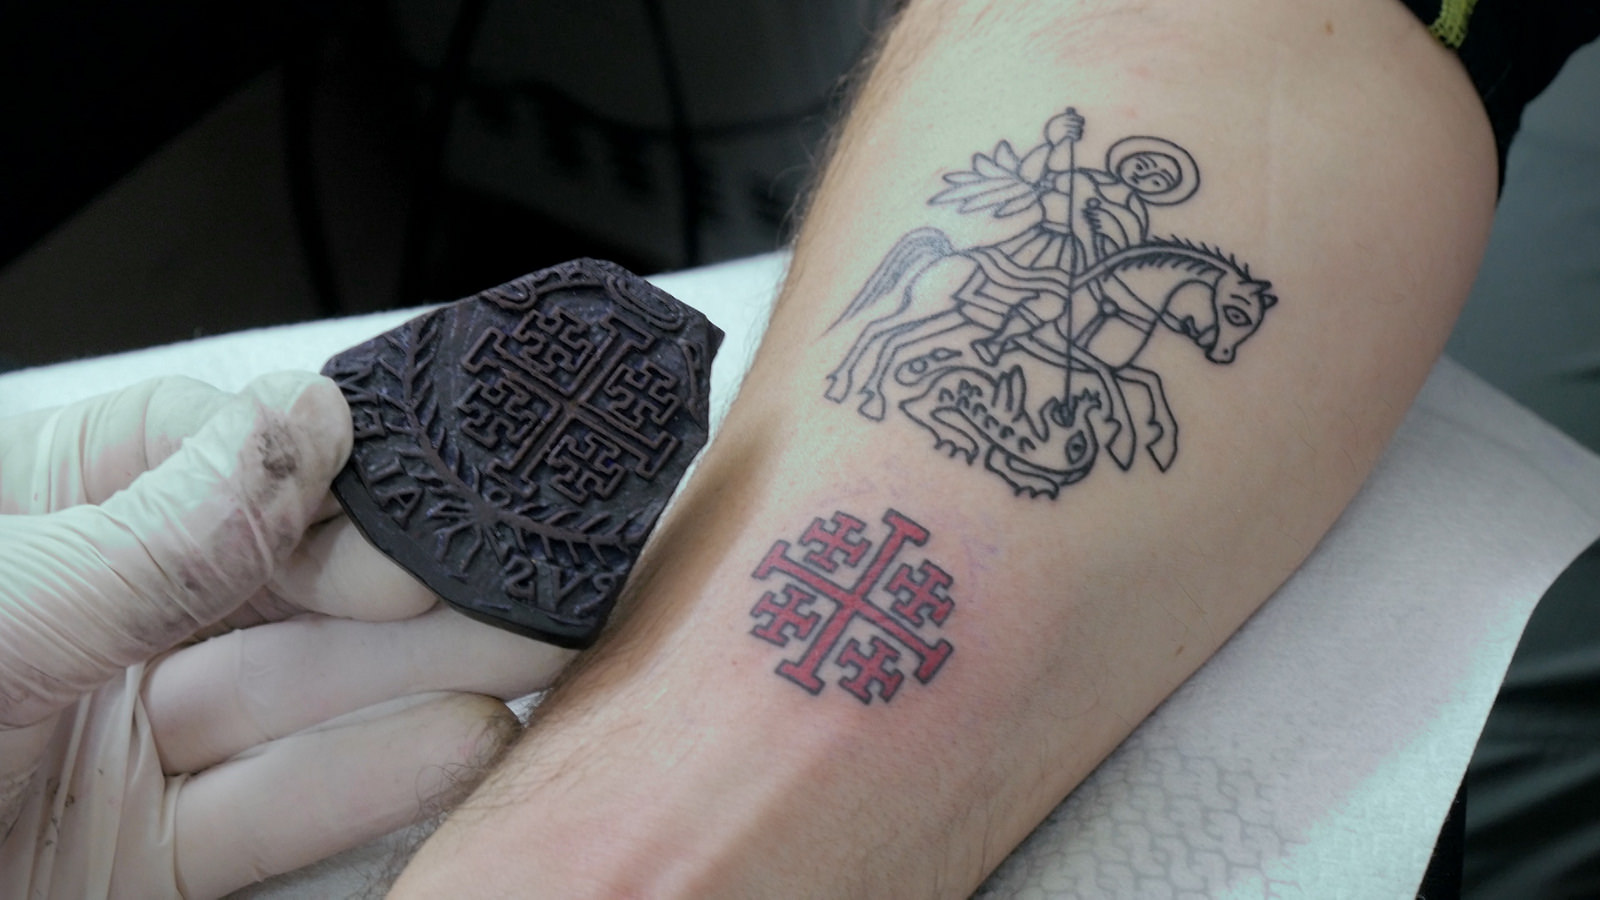 These tattoo blocks are a family heirloom from hundreds of years ago. Photo: screenshot